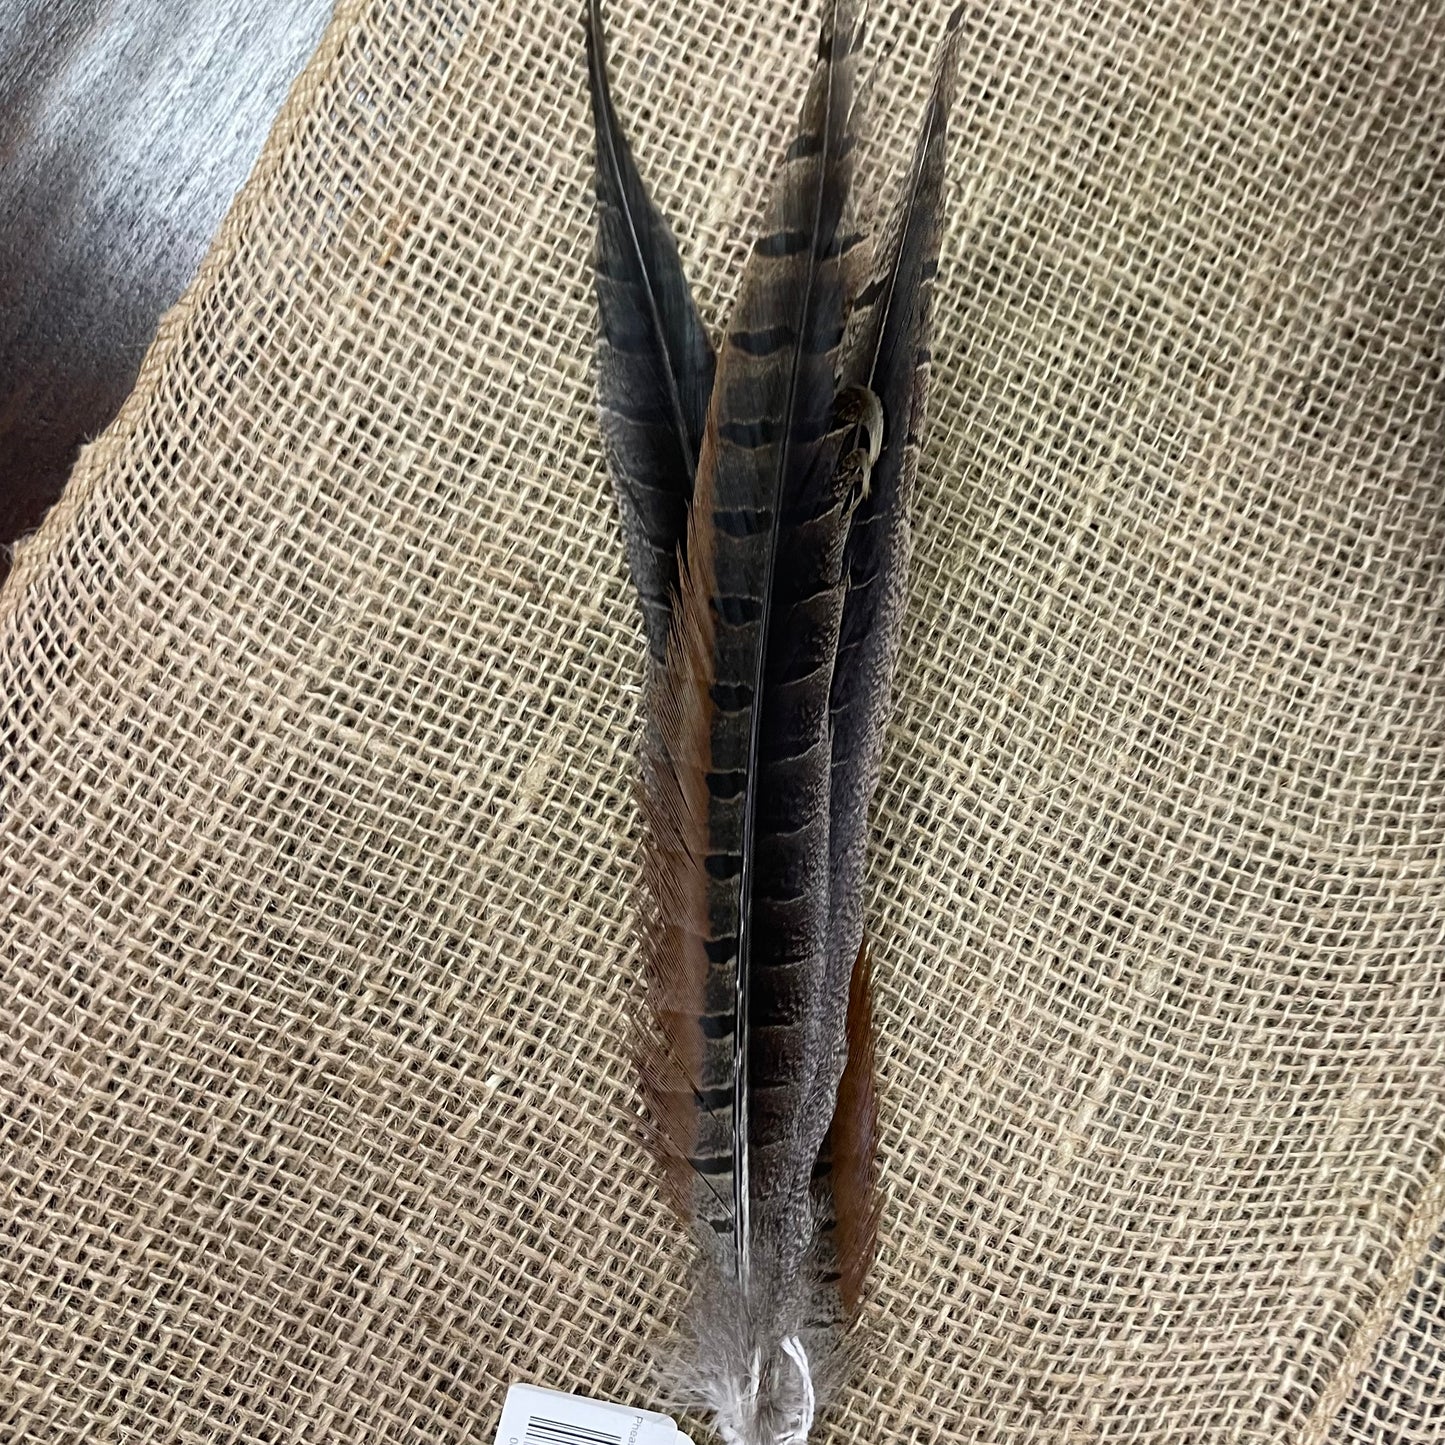 Pheasant Feathers - set of 5